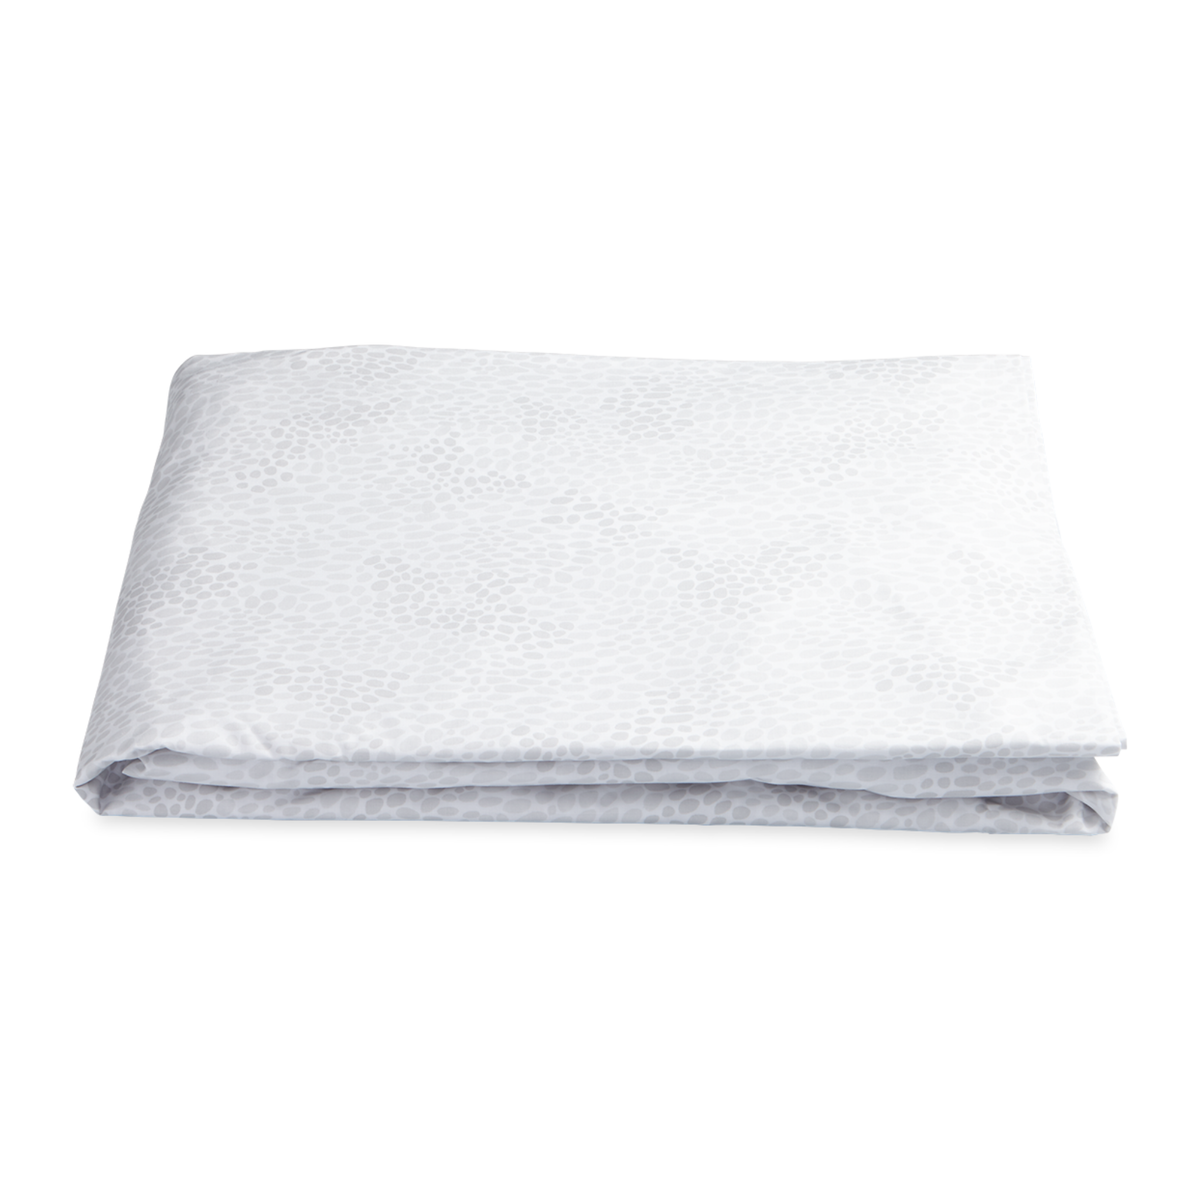 Fitted Sheet of Lulu DK Matouk Nikita Bedding in Silver Color